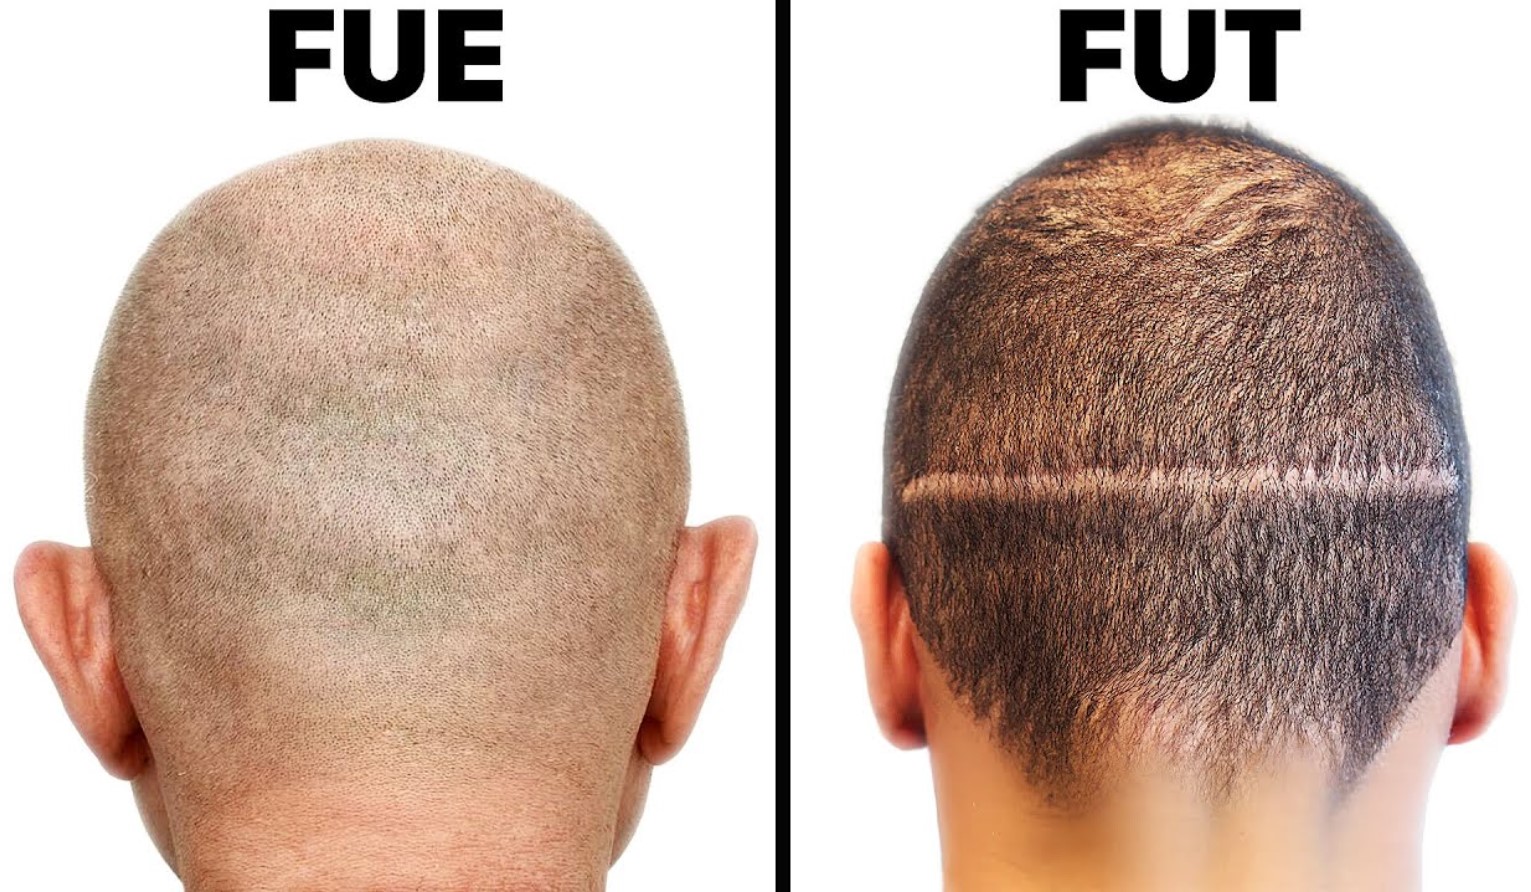 FUE vs. FUT: Which is the Superior Hair Transplant Method? | HairHub